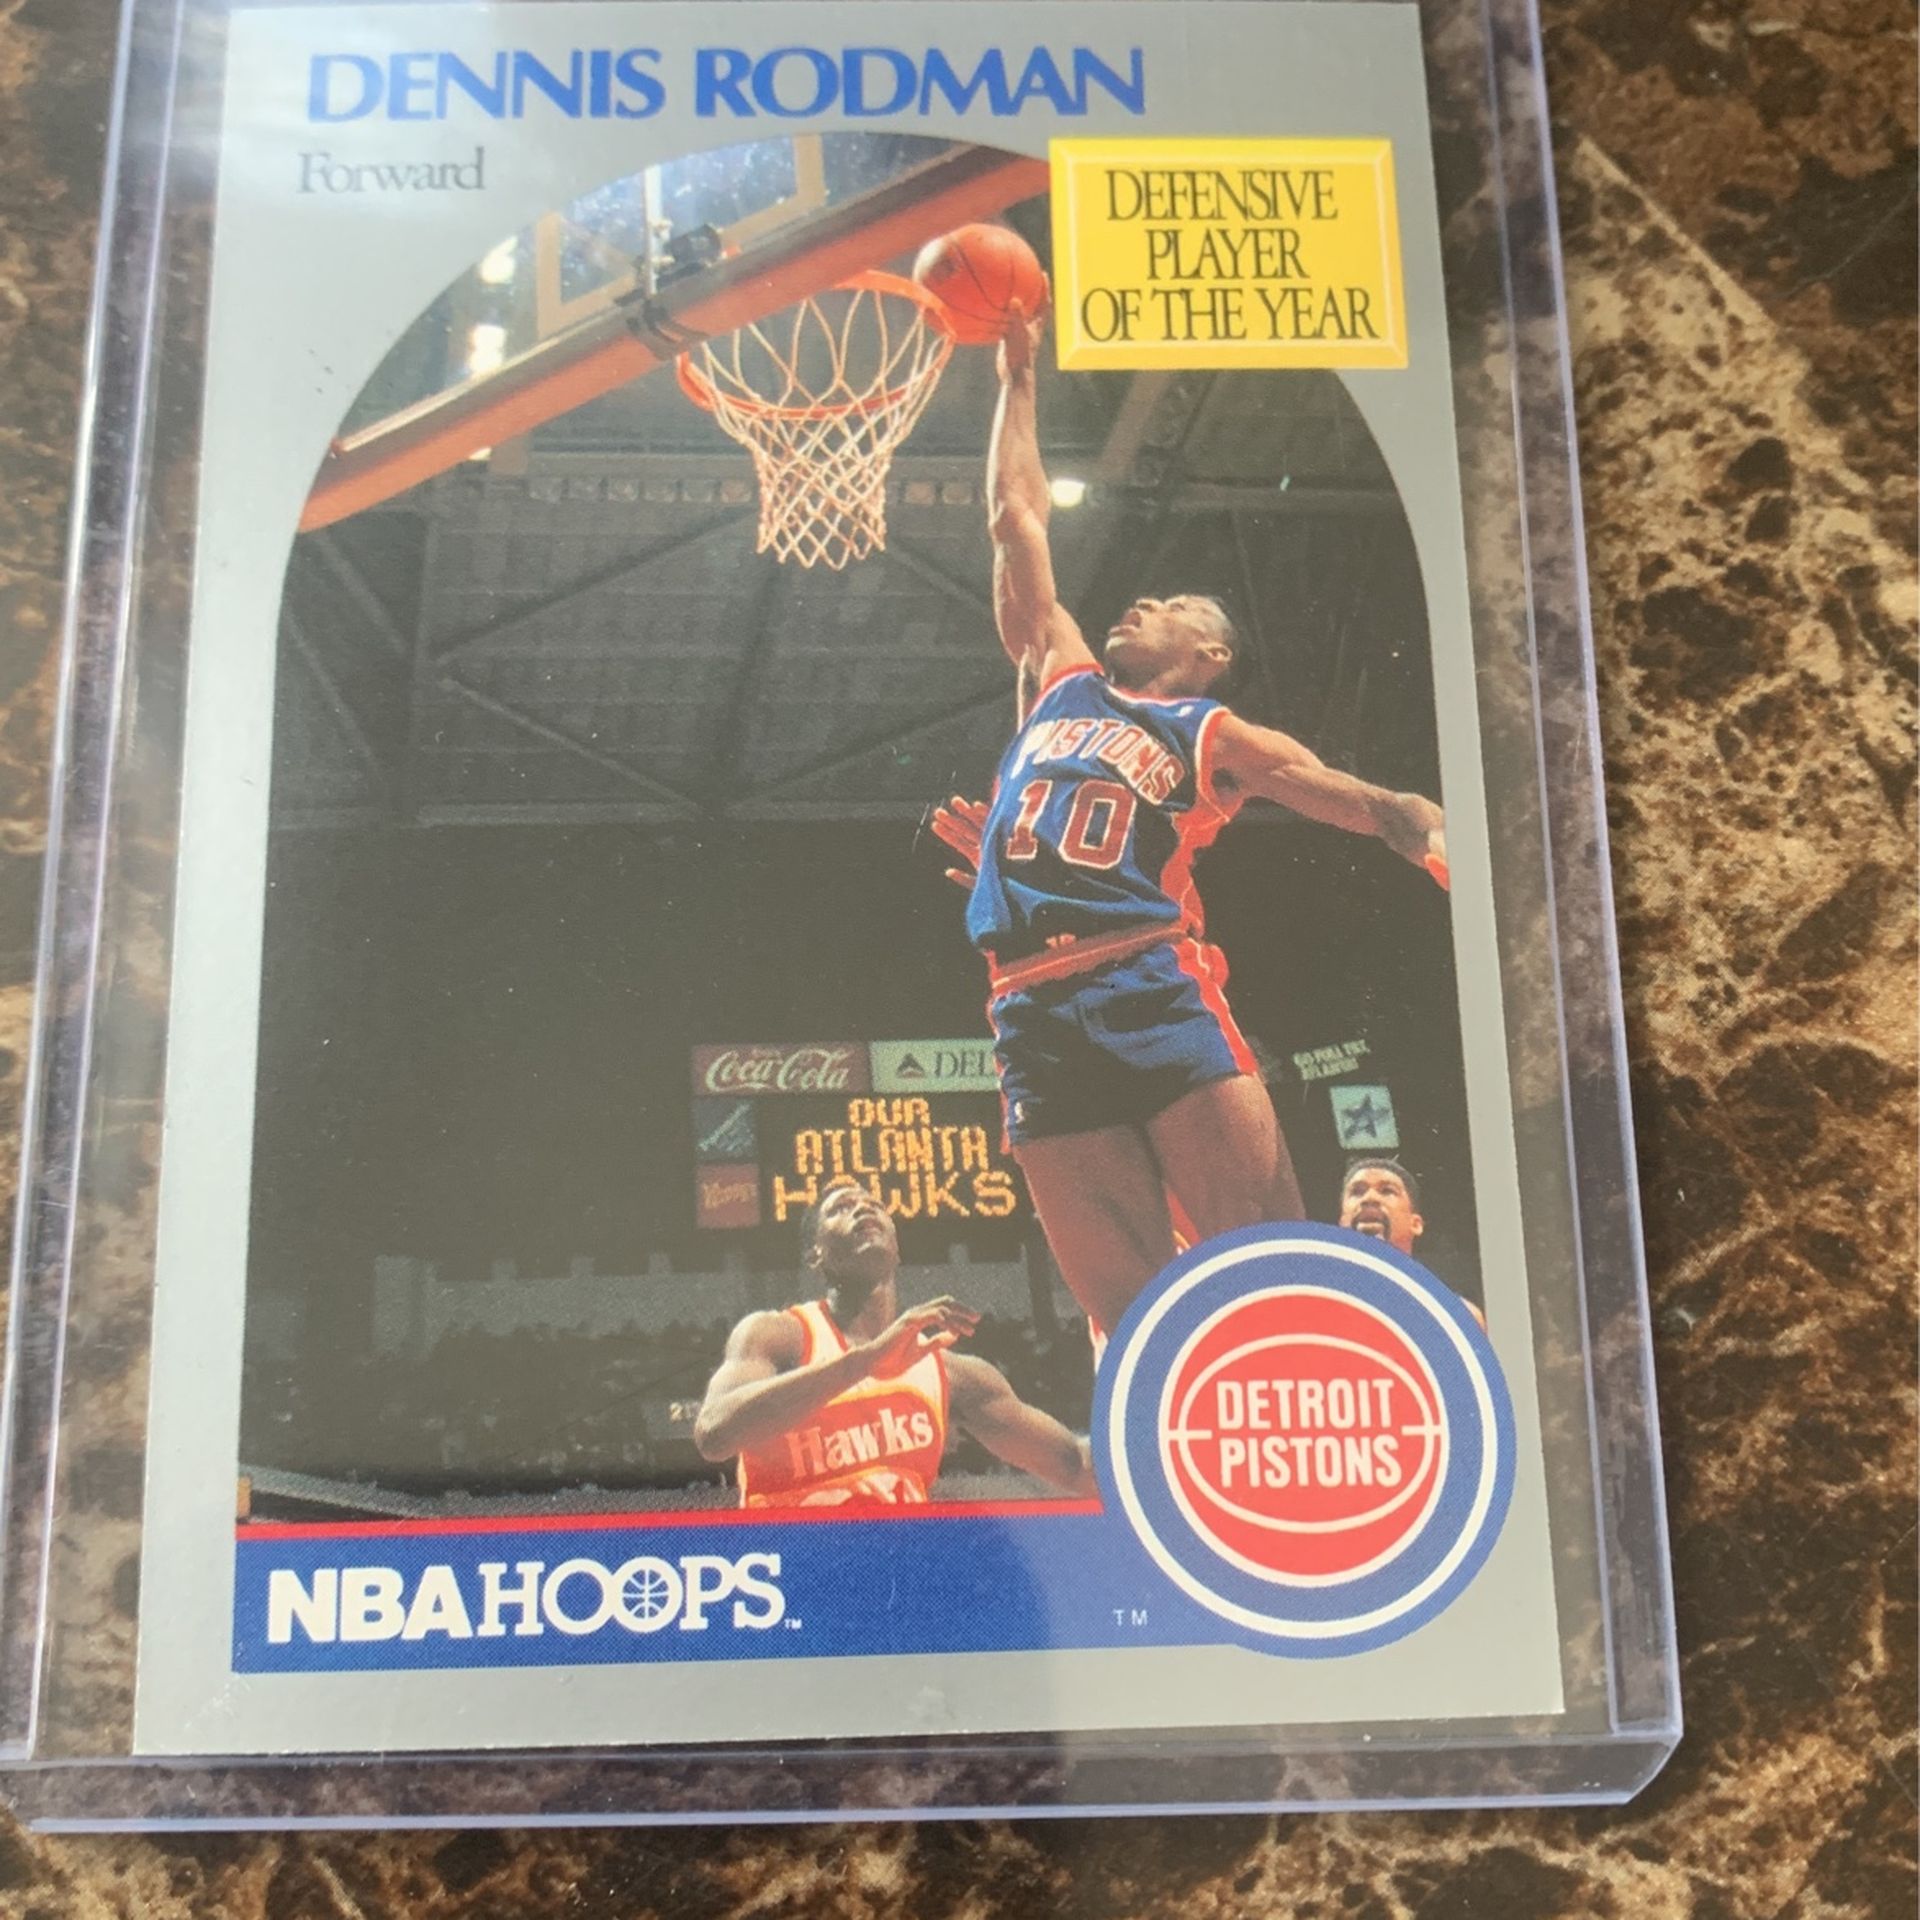 1990 Dennis Rodman defensive player of the year